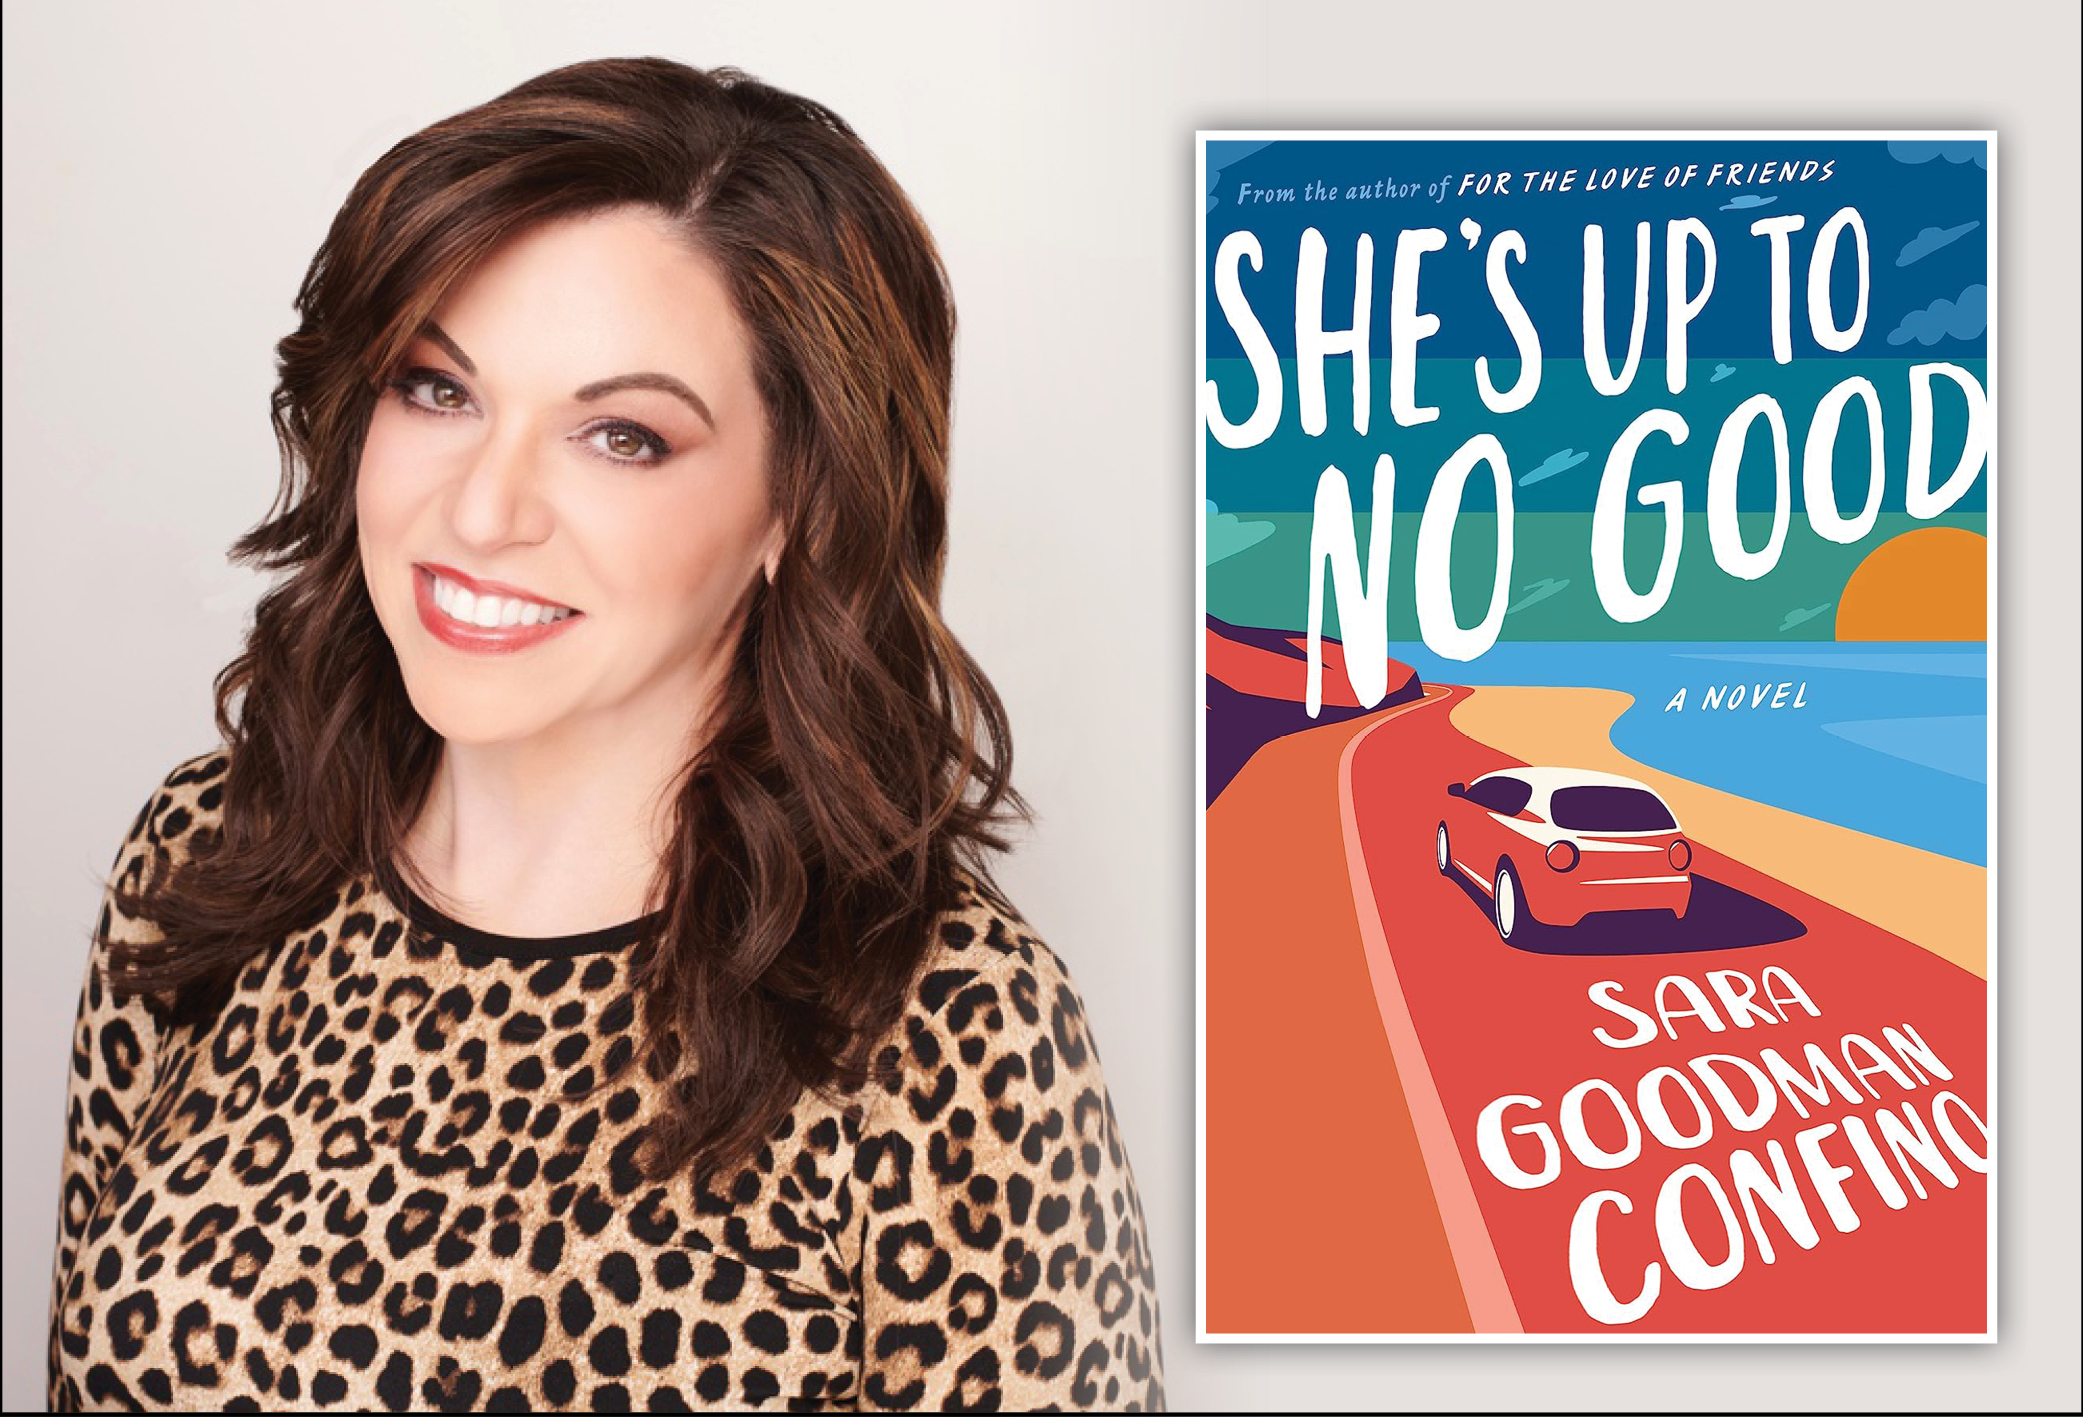 Tuesday, August 27 She's Up to No Good by Sara Goodman Confino